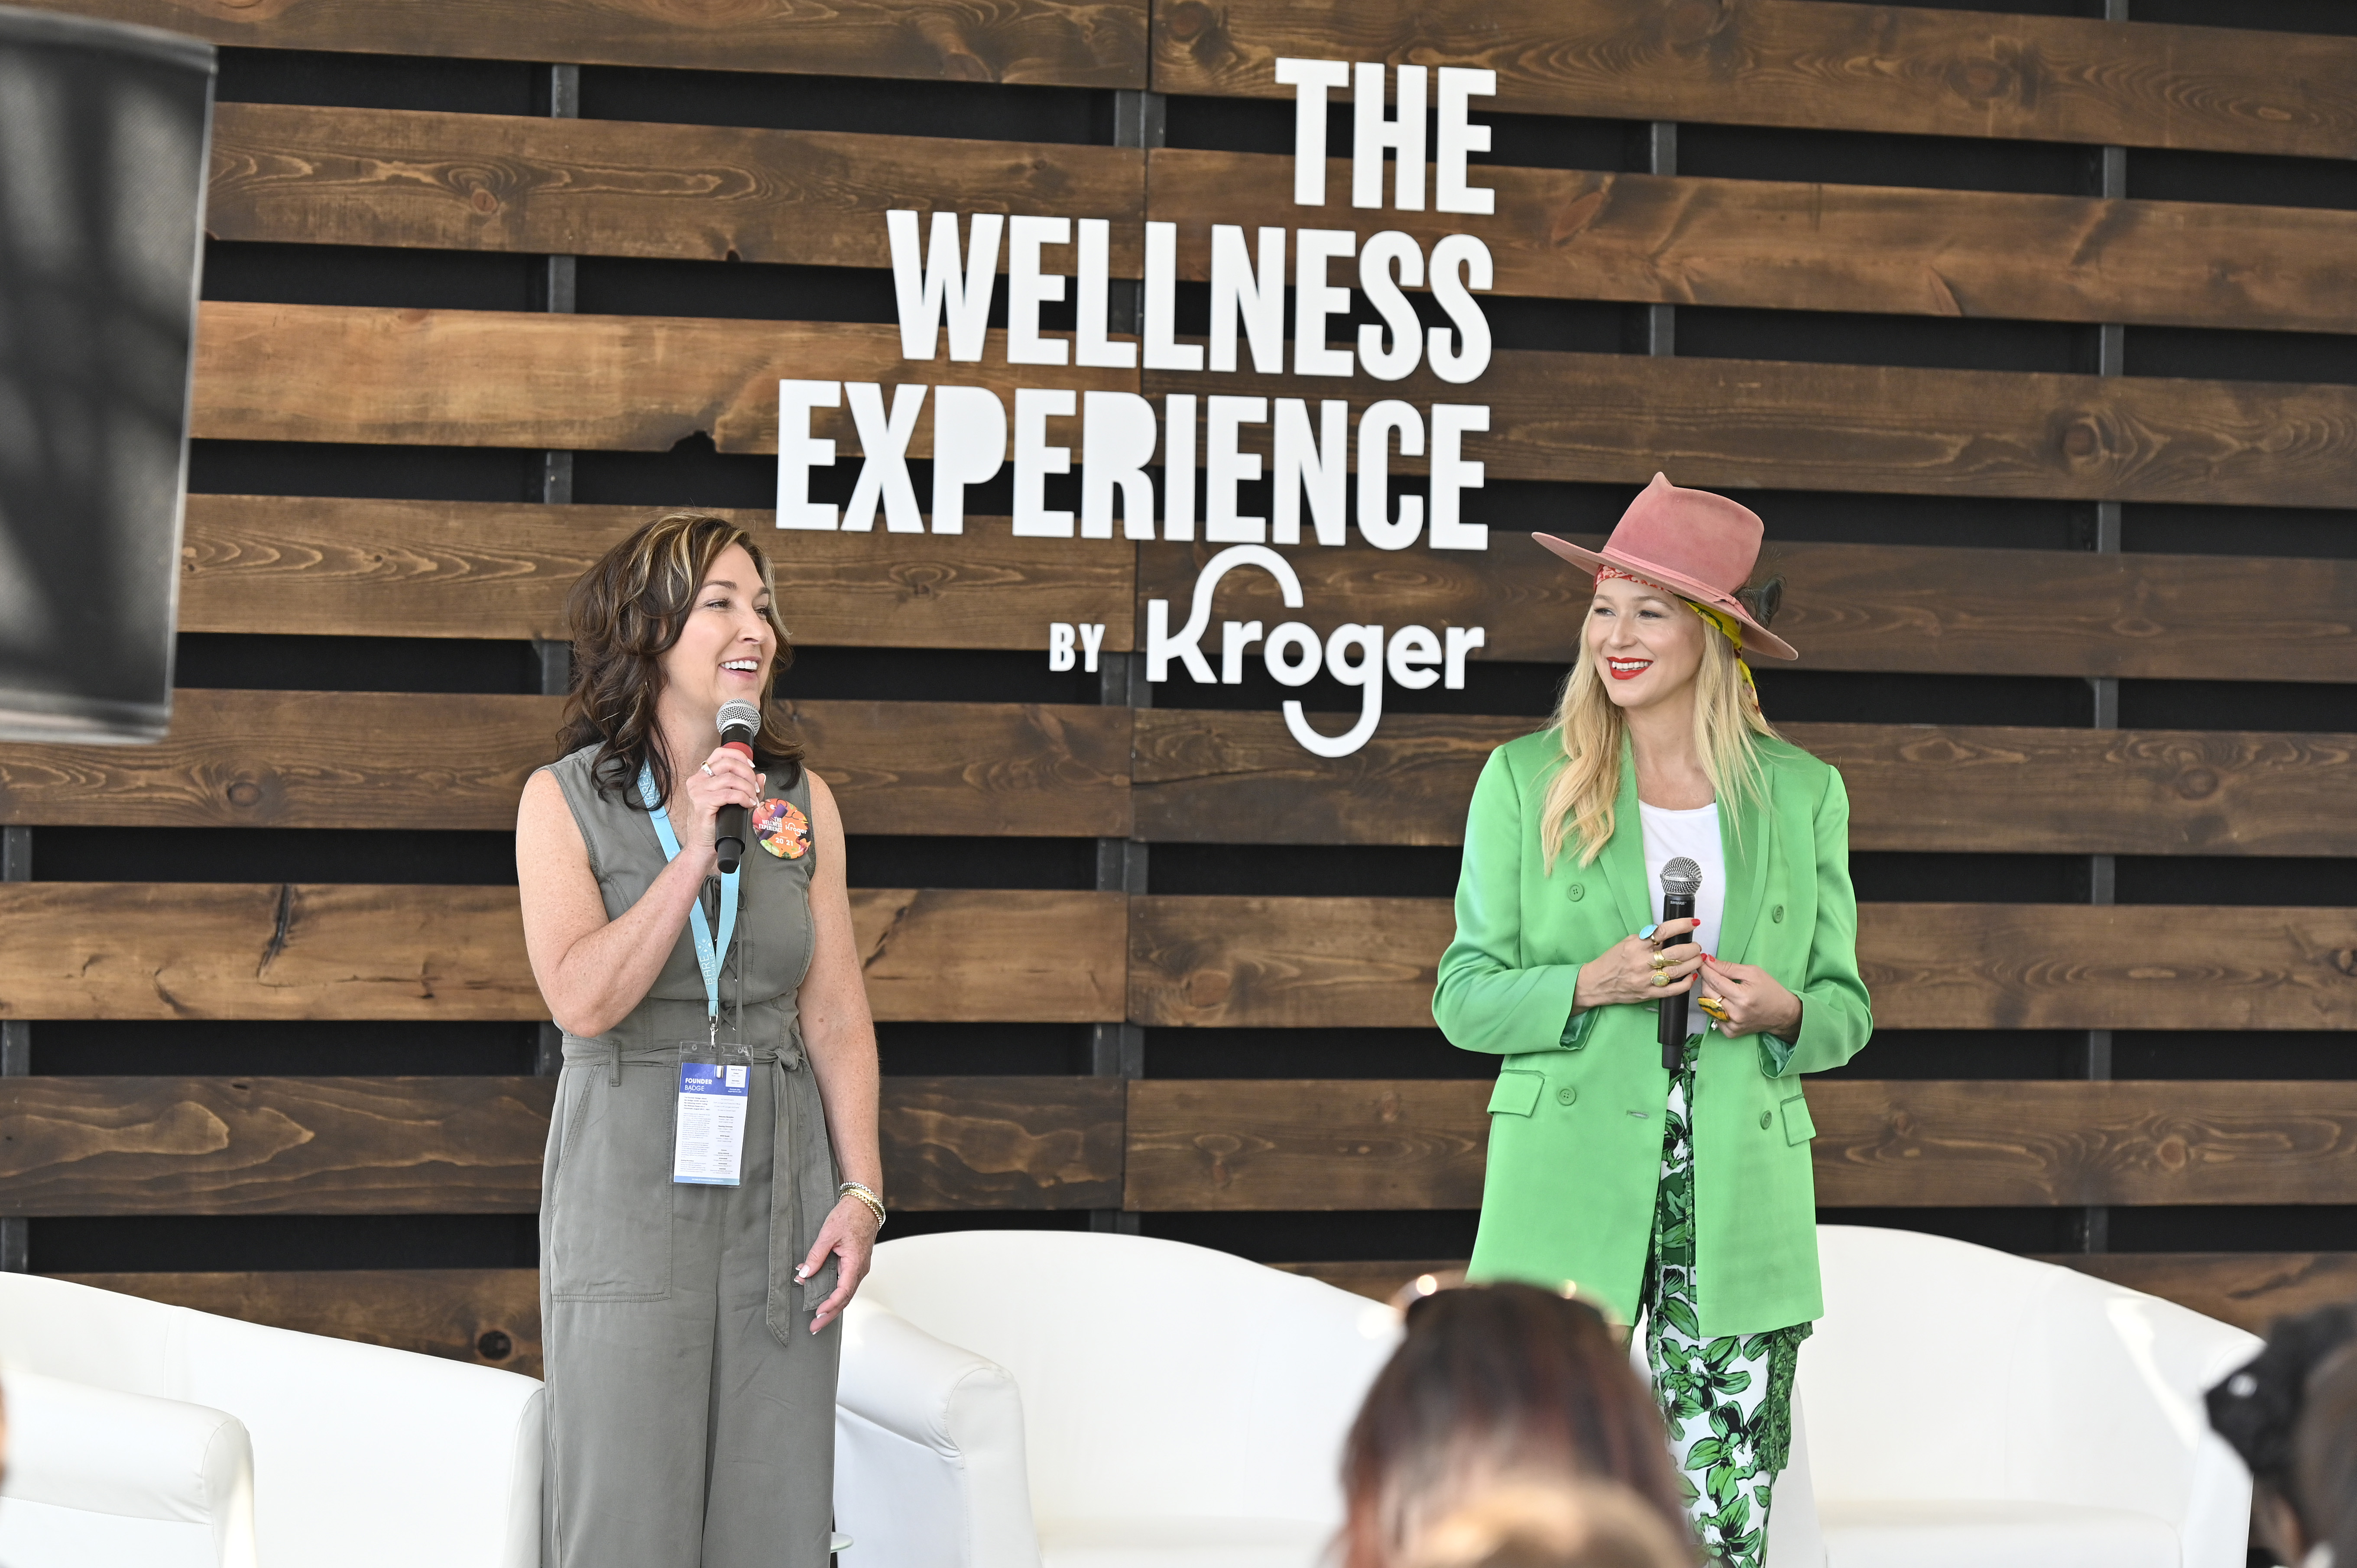 Colleen Lindholz, Kroger Health President, and Jewel speak before the start of Women in Wellness during the second day of The Wellness Experience by Kroger in Cincinnati, Ohio, on August 21, 2021. | Source: Getty Images